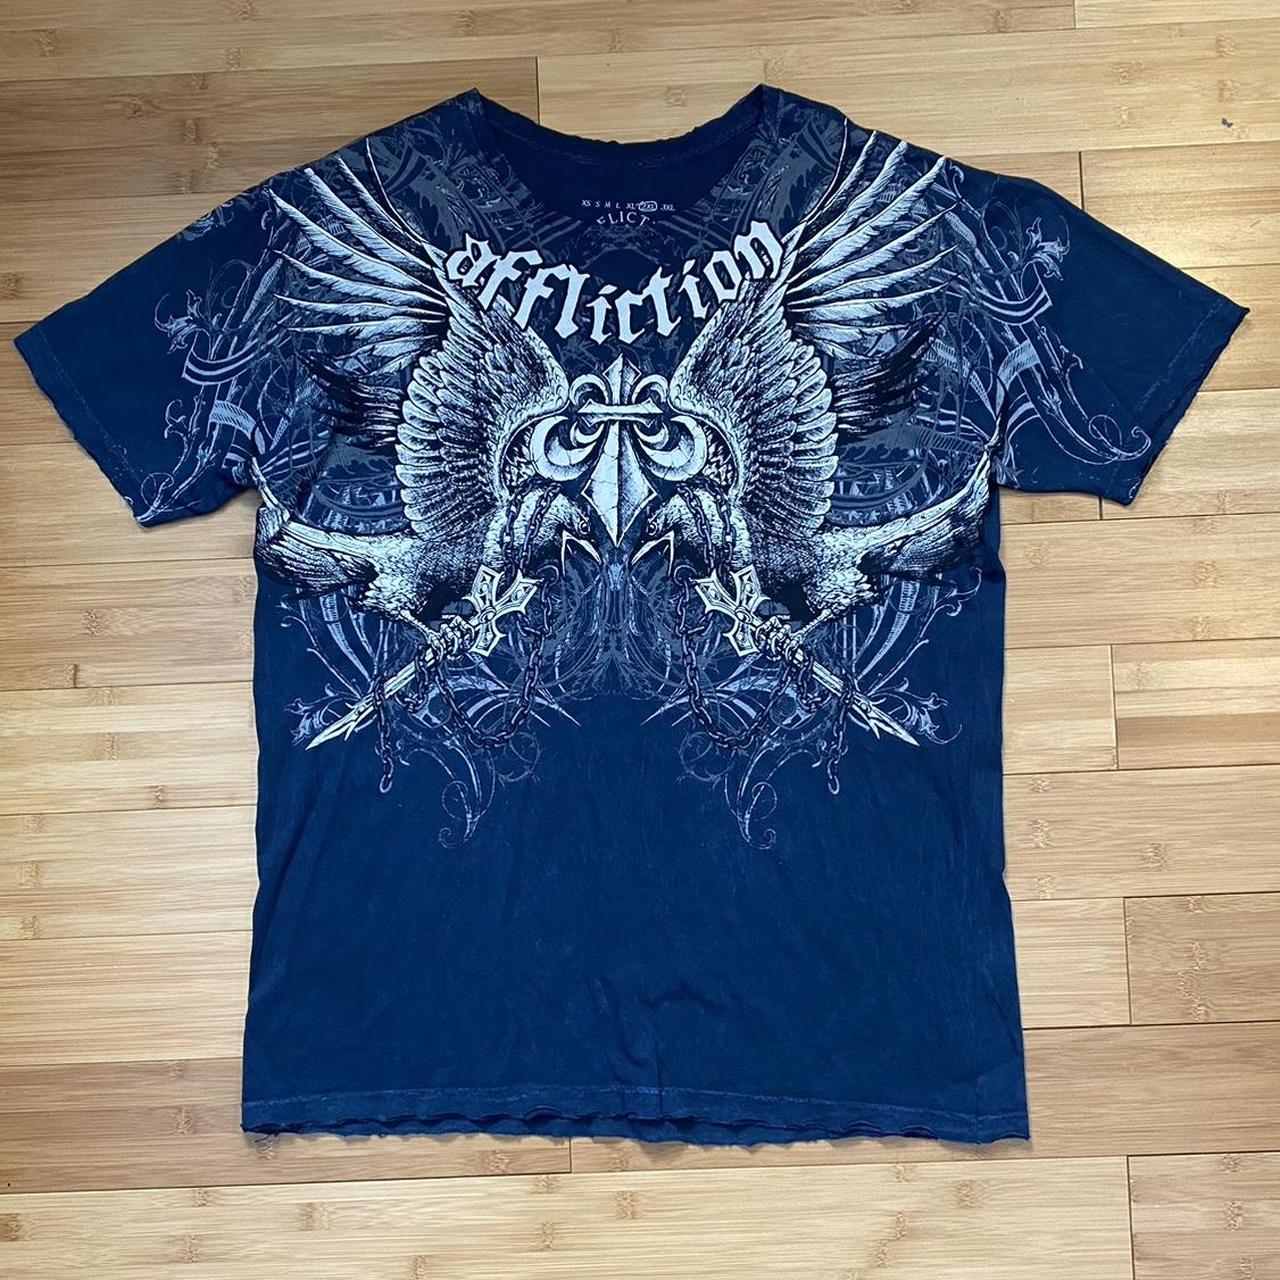 AFFLICTION TSHIRT WITH BIRDS AND CROSSES🦅🦅 ️ Super... - Depop